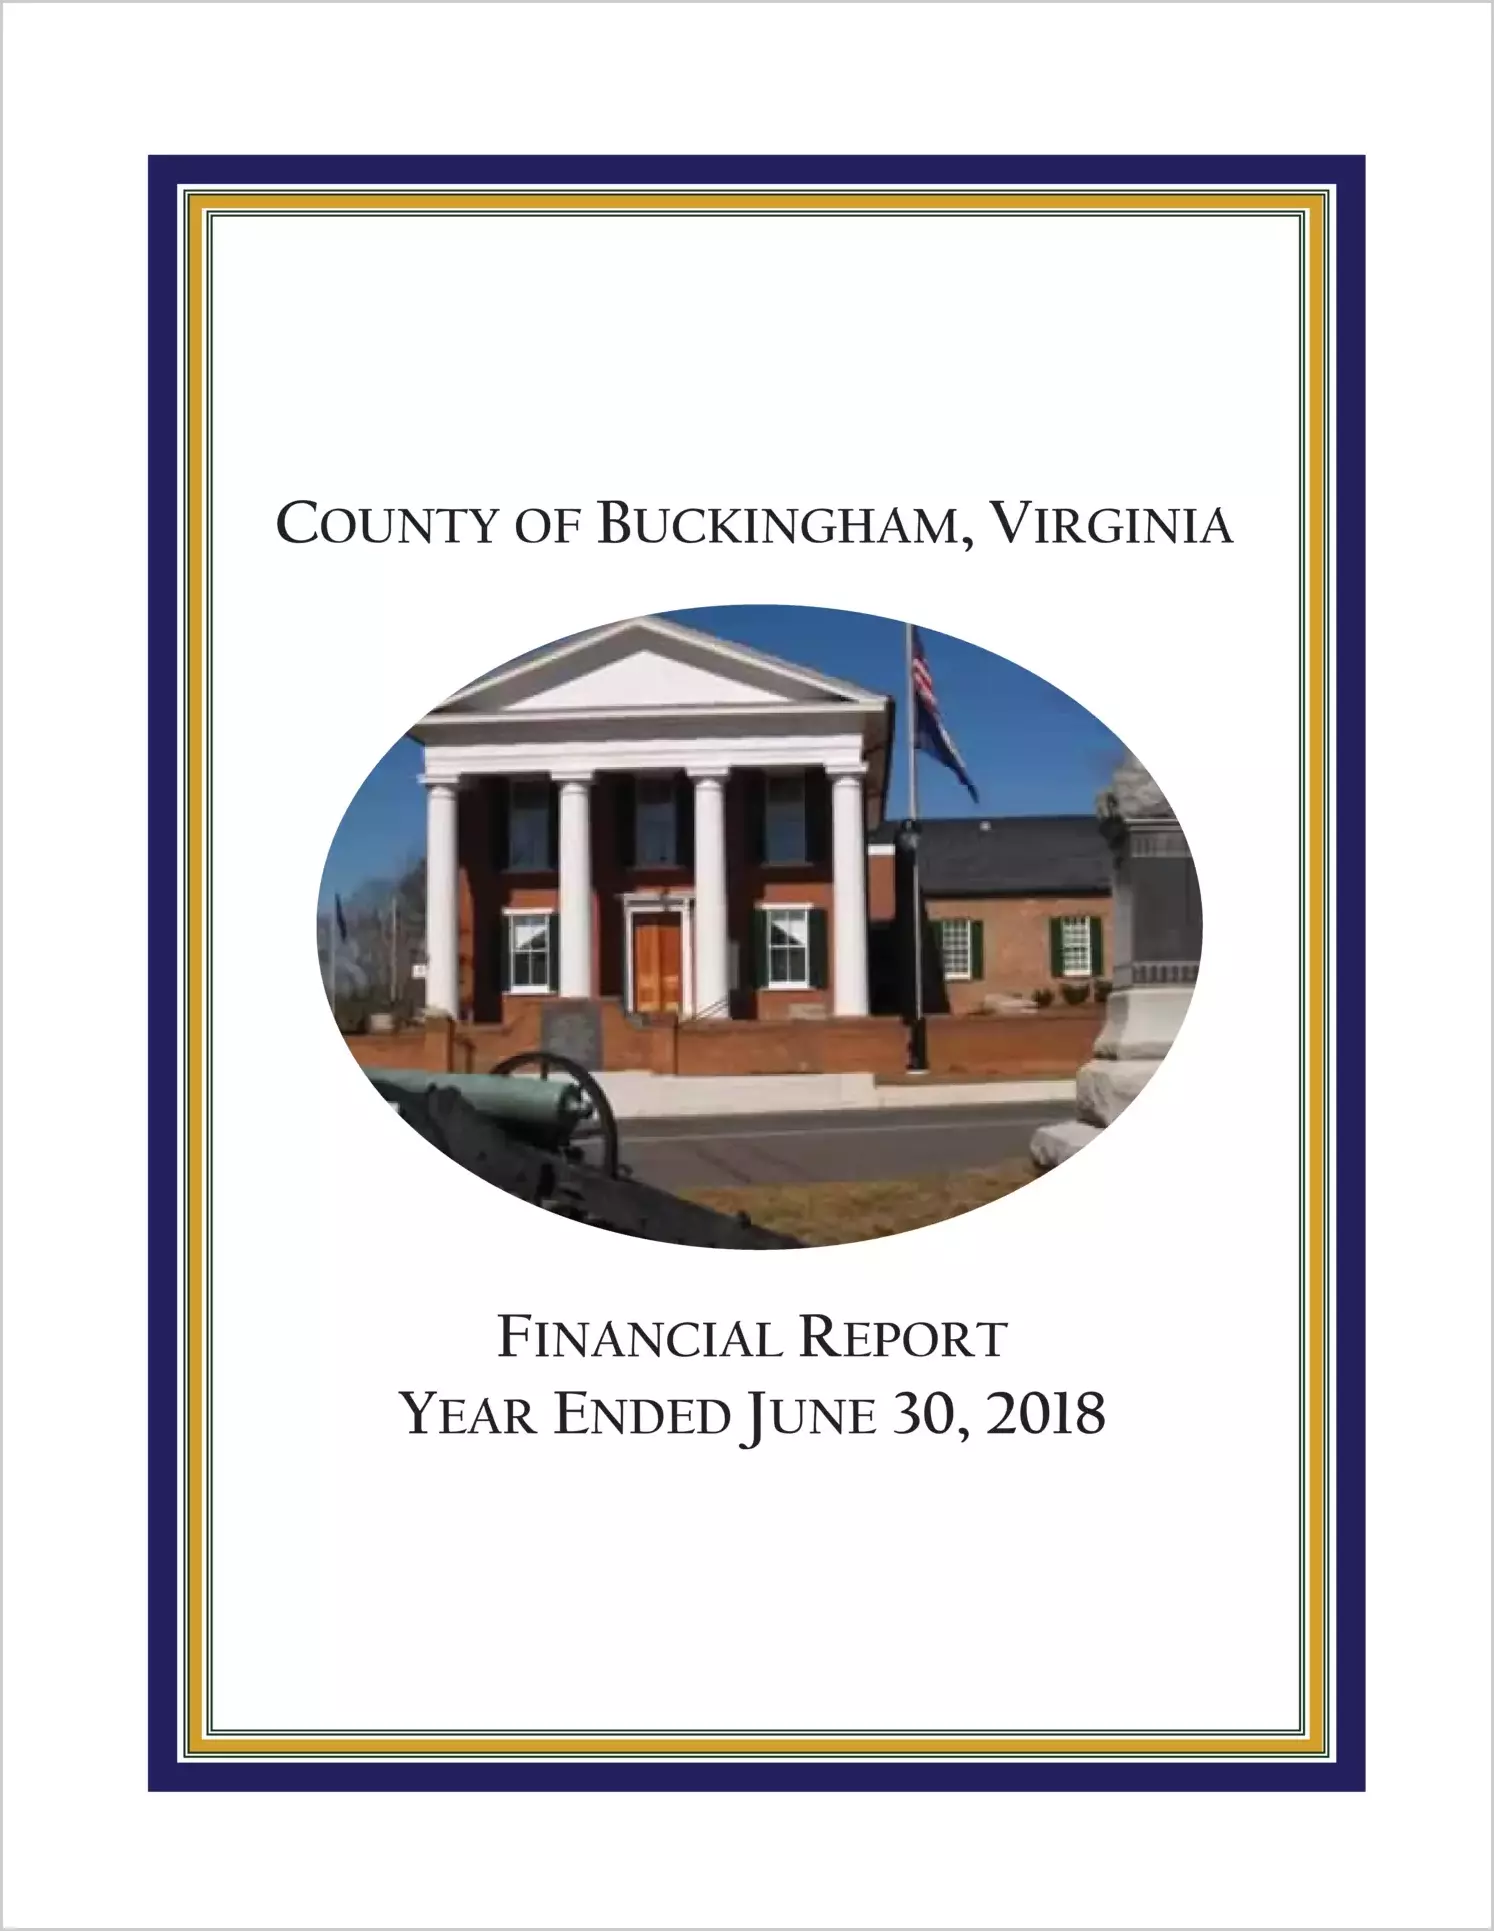 2018 Annual Financial Report for County of Buckingham